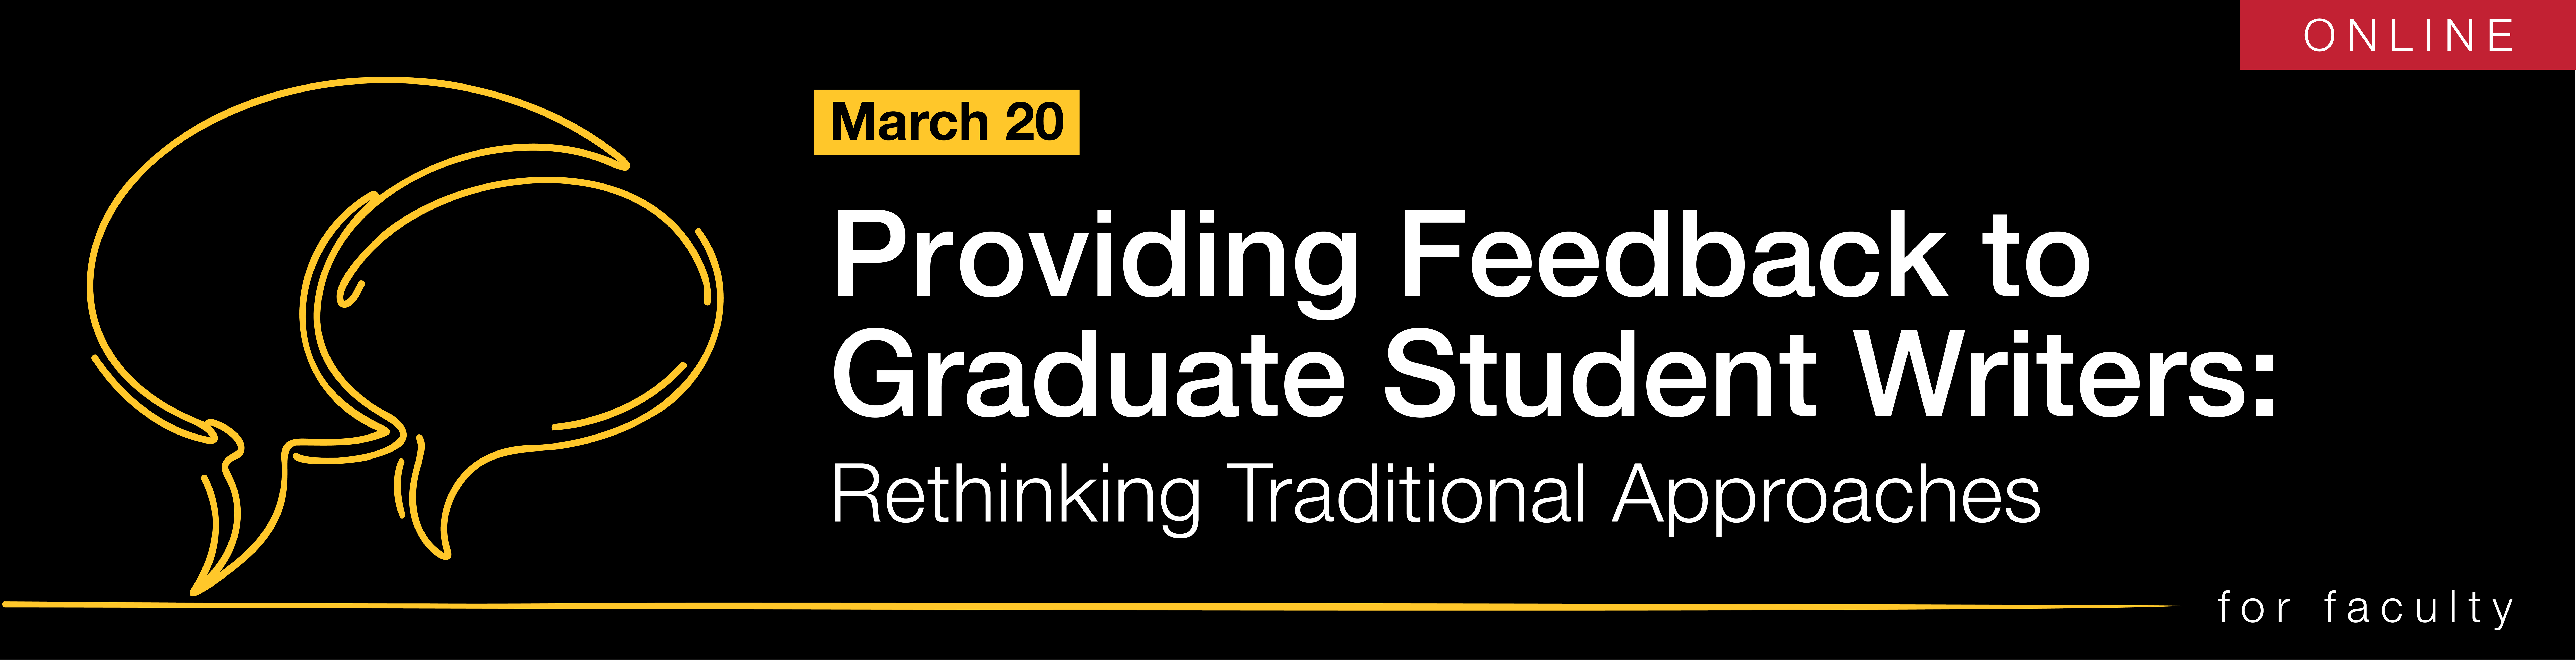 Providing Feedback to Graduate Student Writers: Rethinking Traditional Approaches Banner